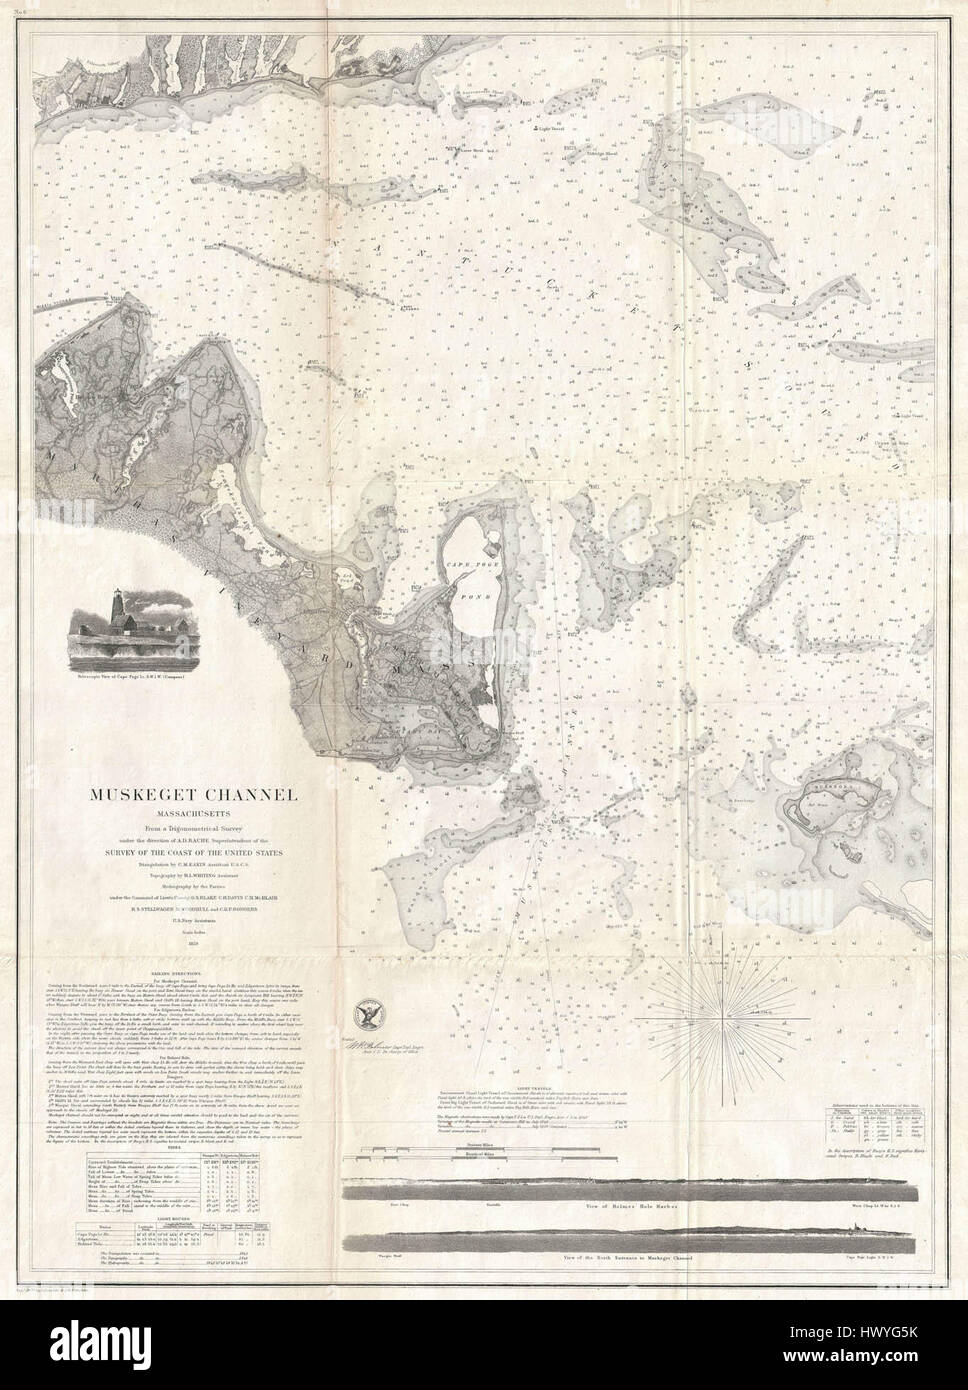 1858 U.S.C.S. Map or Chart of Martha's Vineyard or Muskeget Channel   Geographicus   MuskegetChannel uscs 1859 Stock Photo